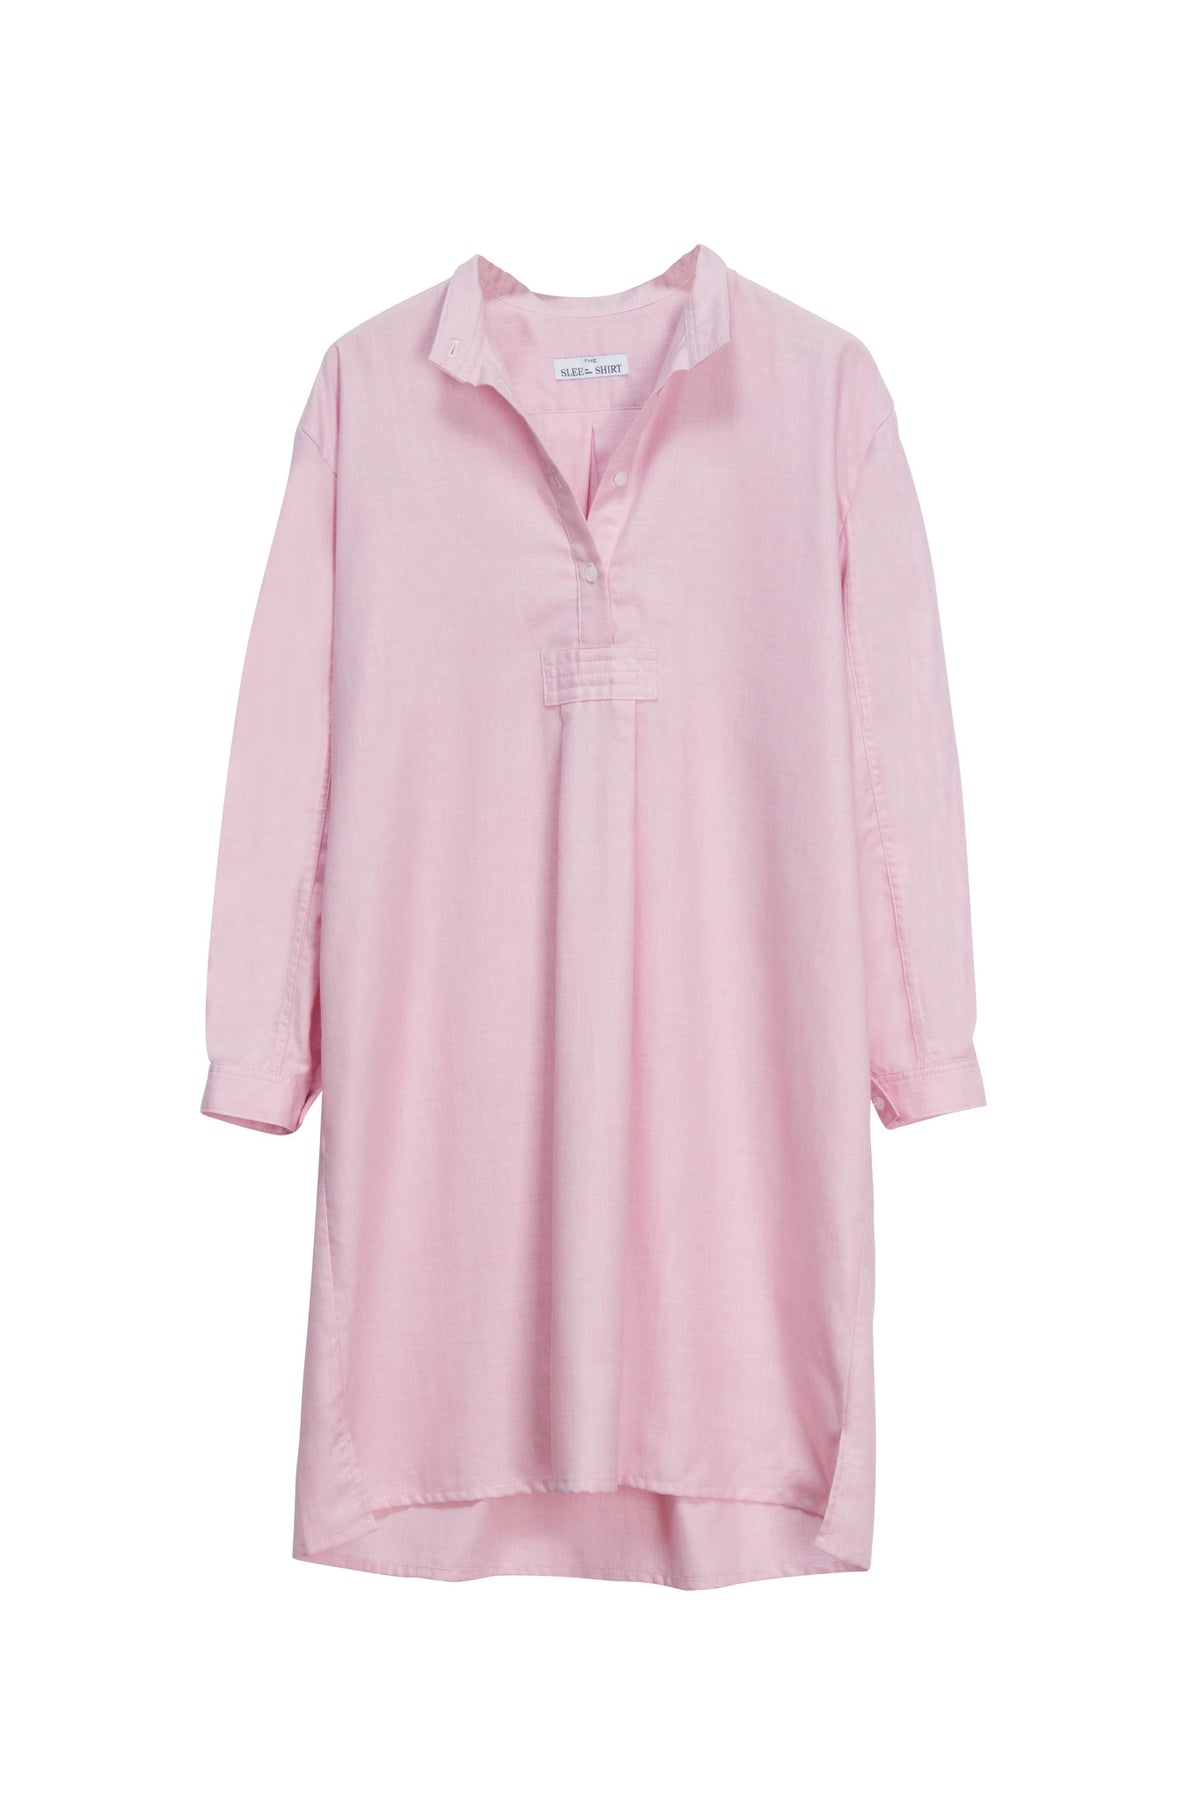 Long Nightshirt in Pink Cashmere – The Sleep Shirt